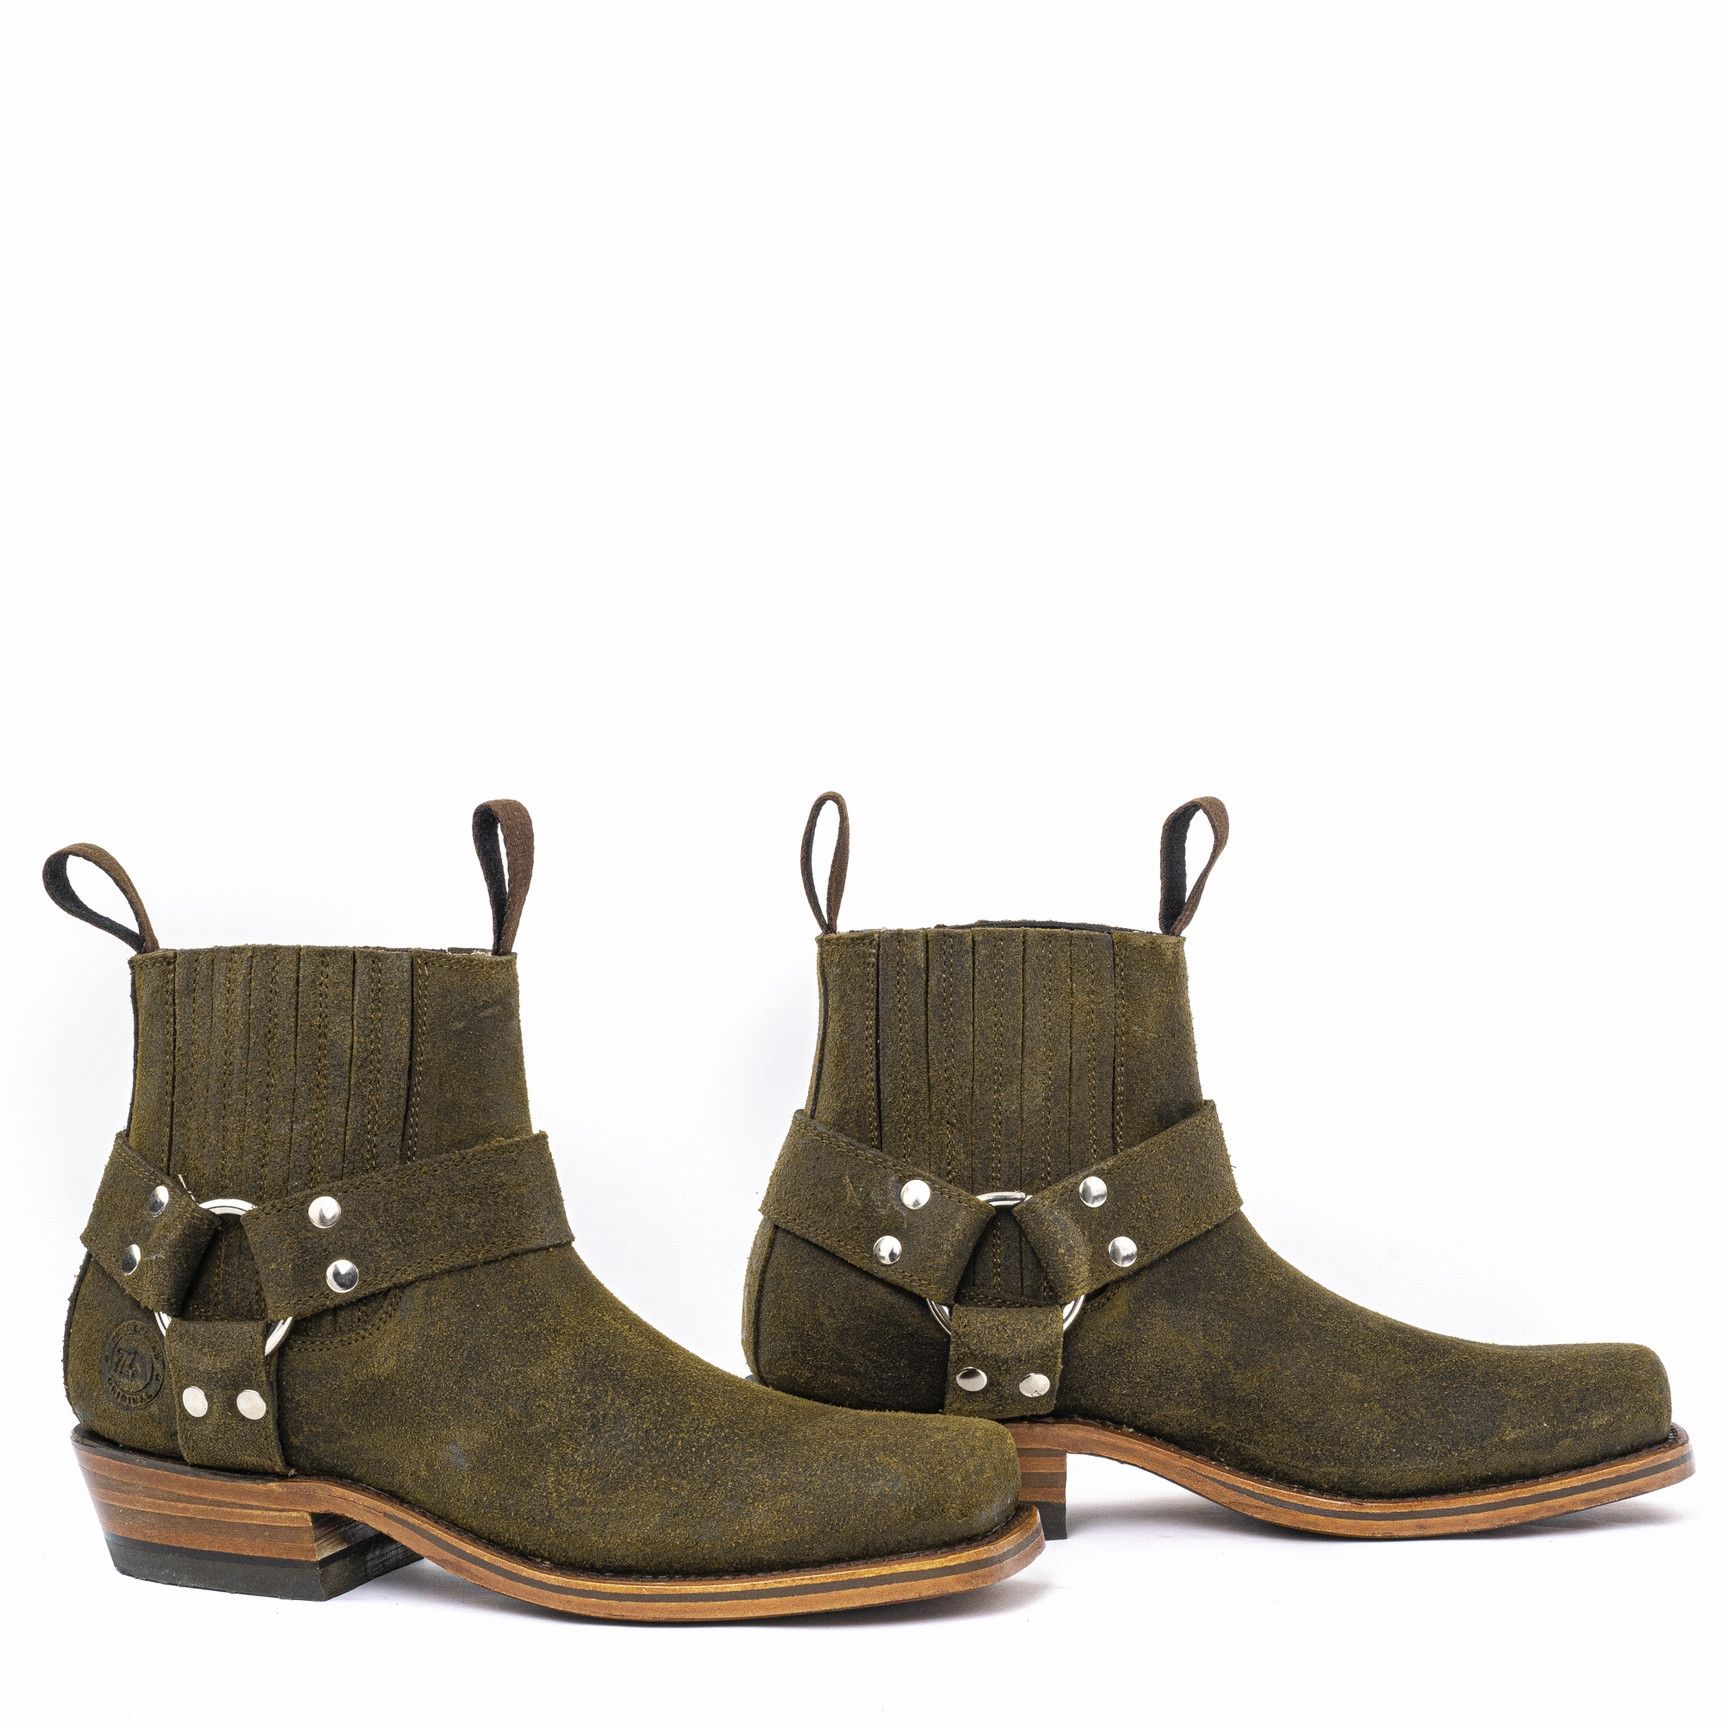 TOLTECA BOOTS DARK OLIVE THIS STYLE RUNS SMALL, ORDER 1 SIZE UP THAN YOUR USUAL SIZE        SQUARE TOE BOOTIES WITH LEATHER STRA